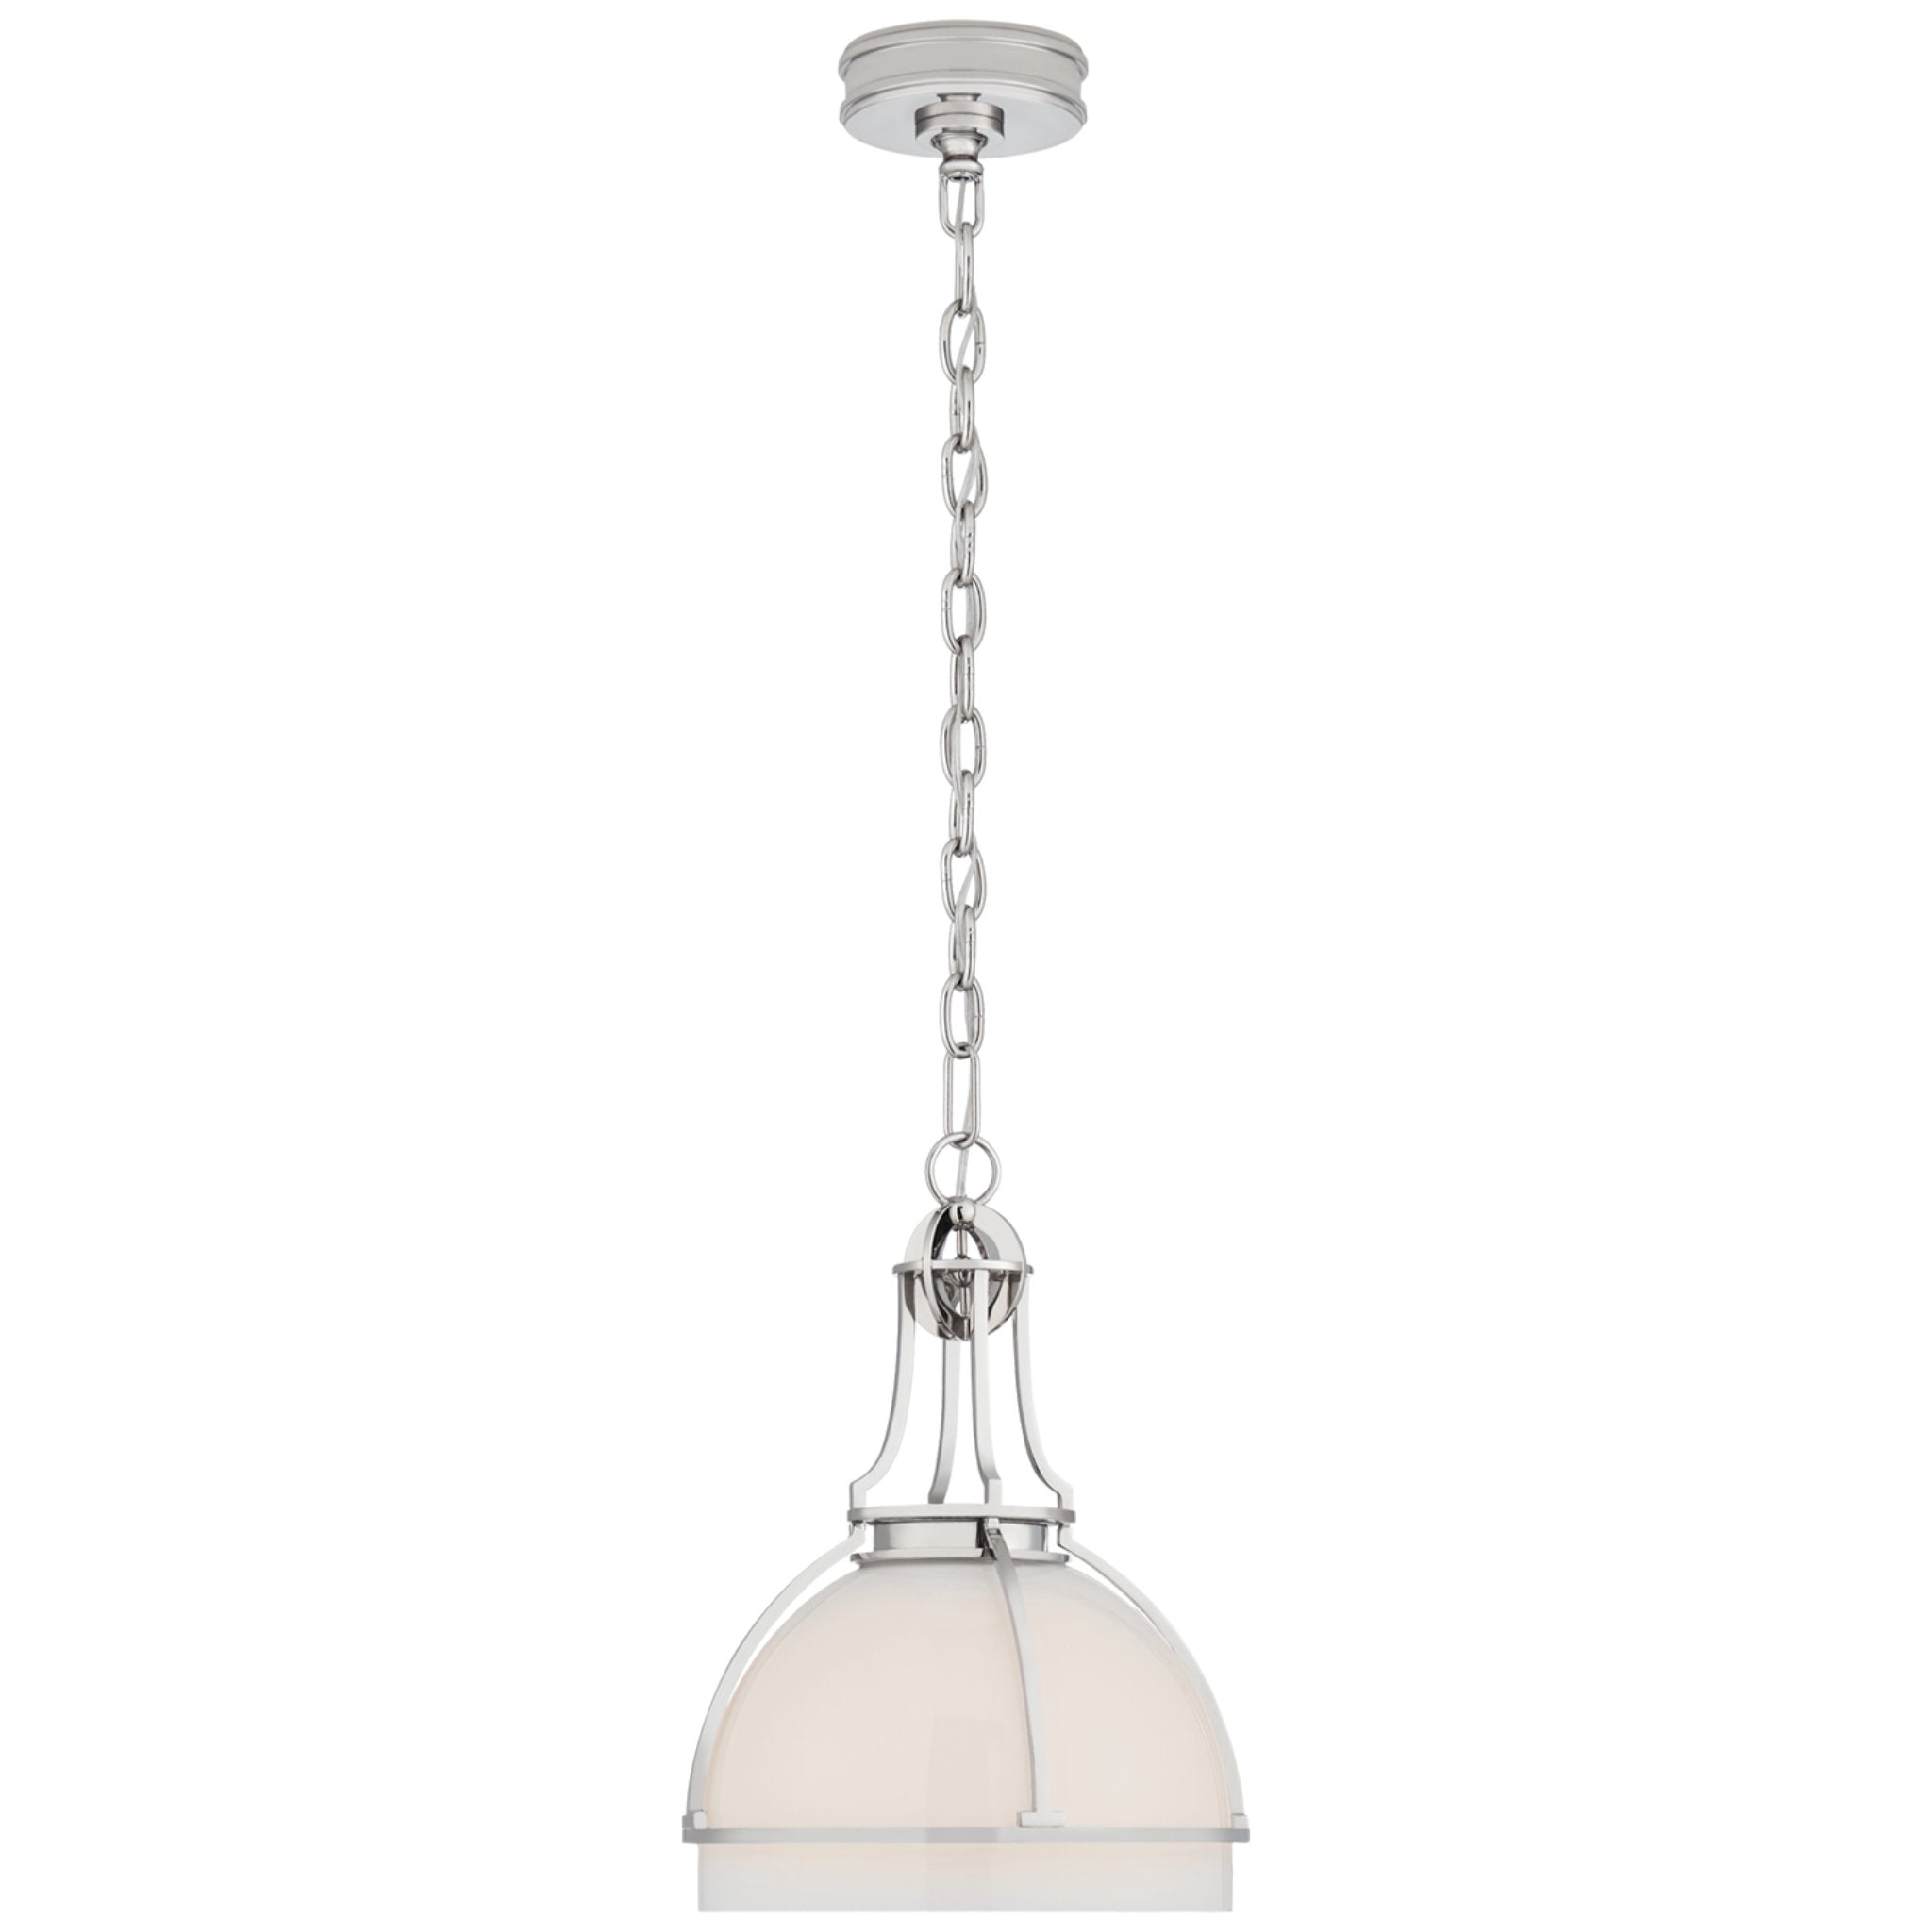 Chapman & Myers Gracie Medium Dome Pendant in Polished Nickel with White Glass